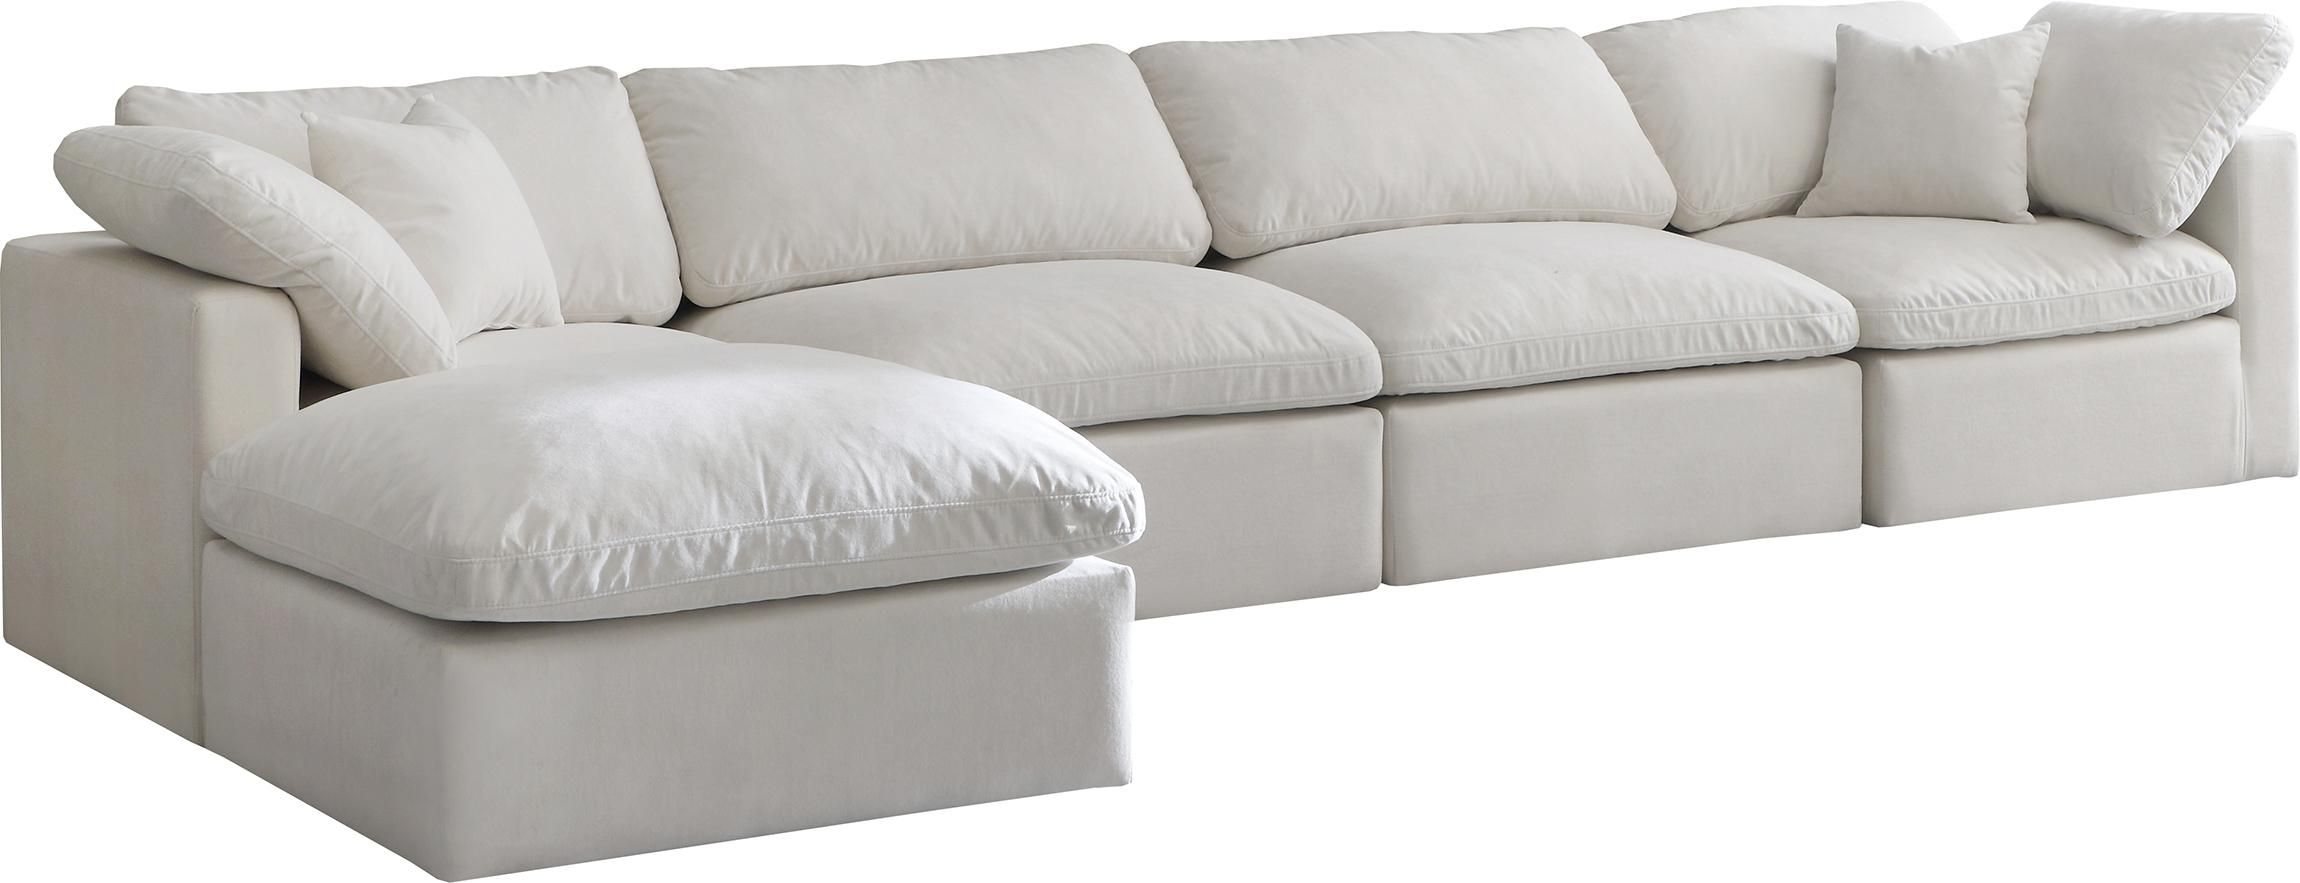 Cream Velvet Cloud 5A Modular Down Filled Reversible Sectional Soflex  Modern – Buy Online On Ny Furniture Outlet Inside Cream Velvet Modular Sectionals (View 4 of 15)